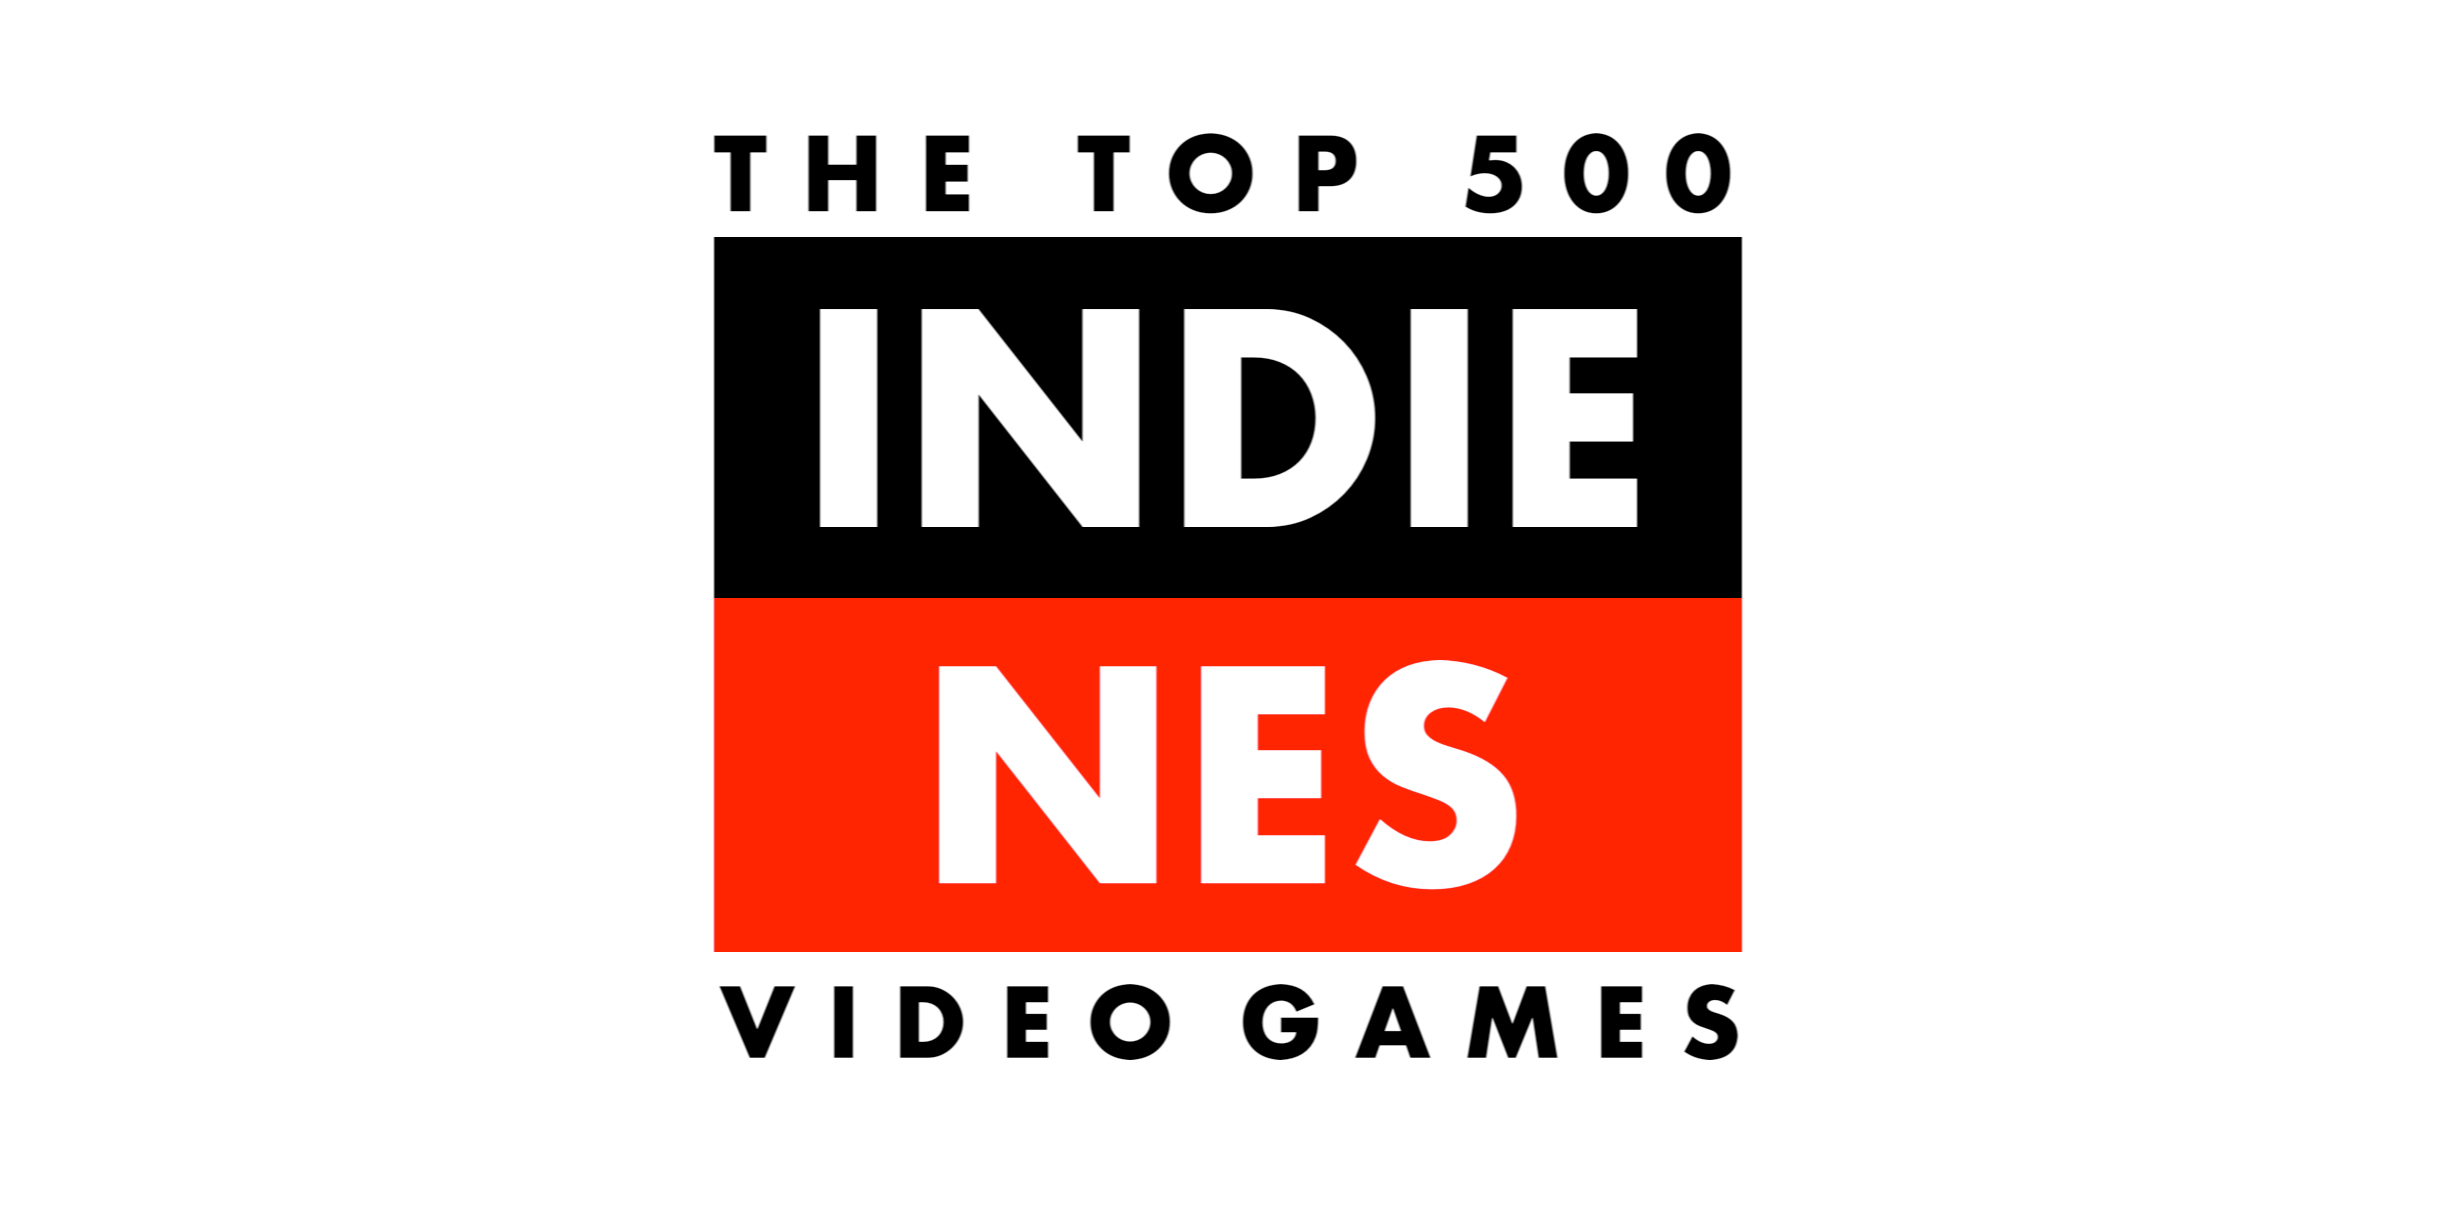 The Top 500 Indie NES Games, Vol. 8 - by Seth Abramson